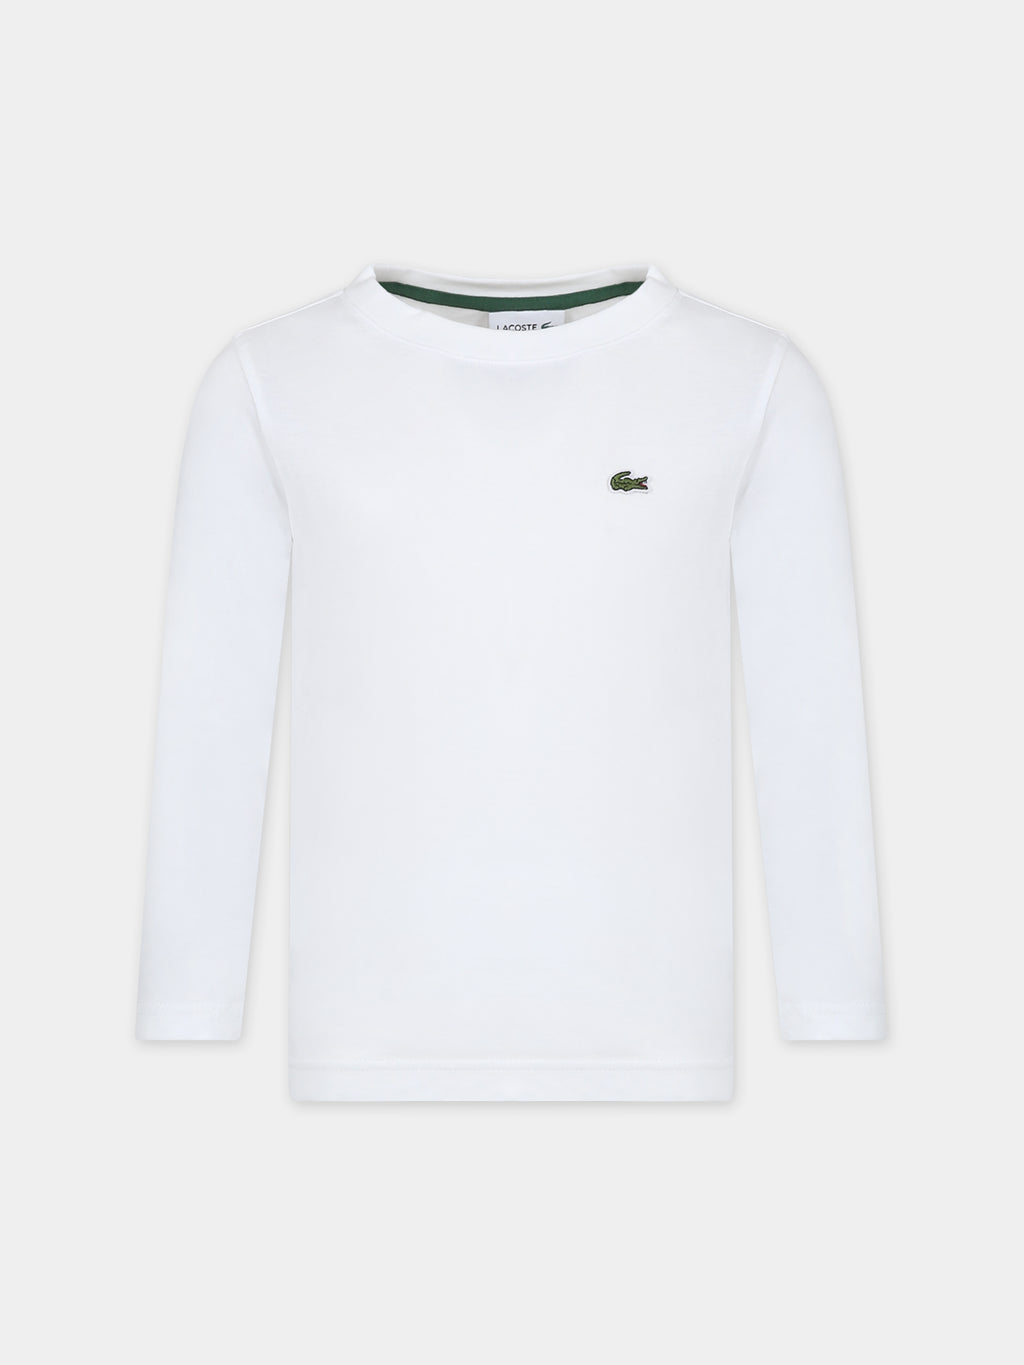 White t-shirt for boy with crocodile